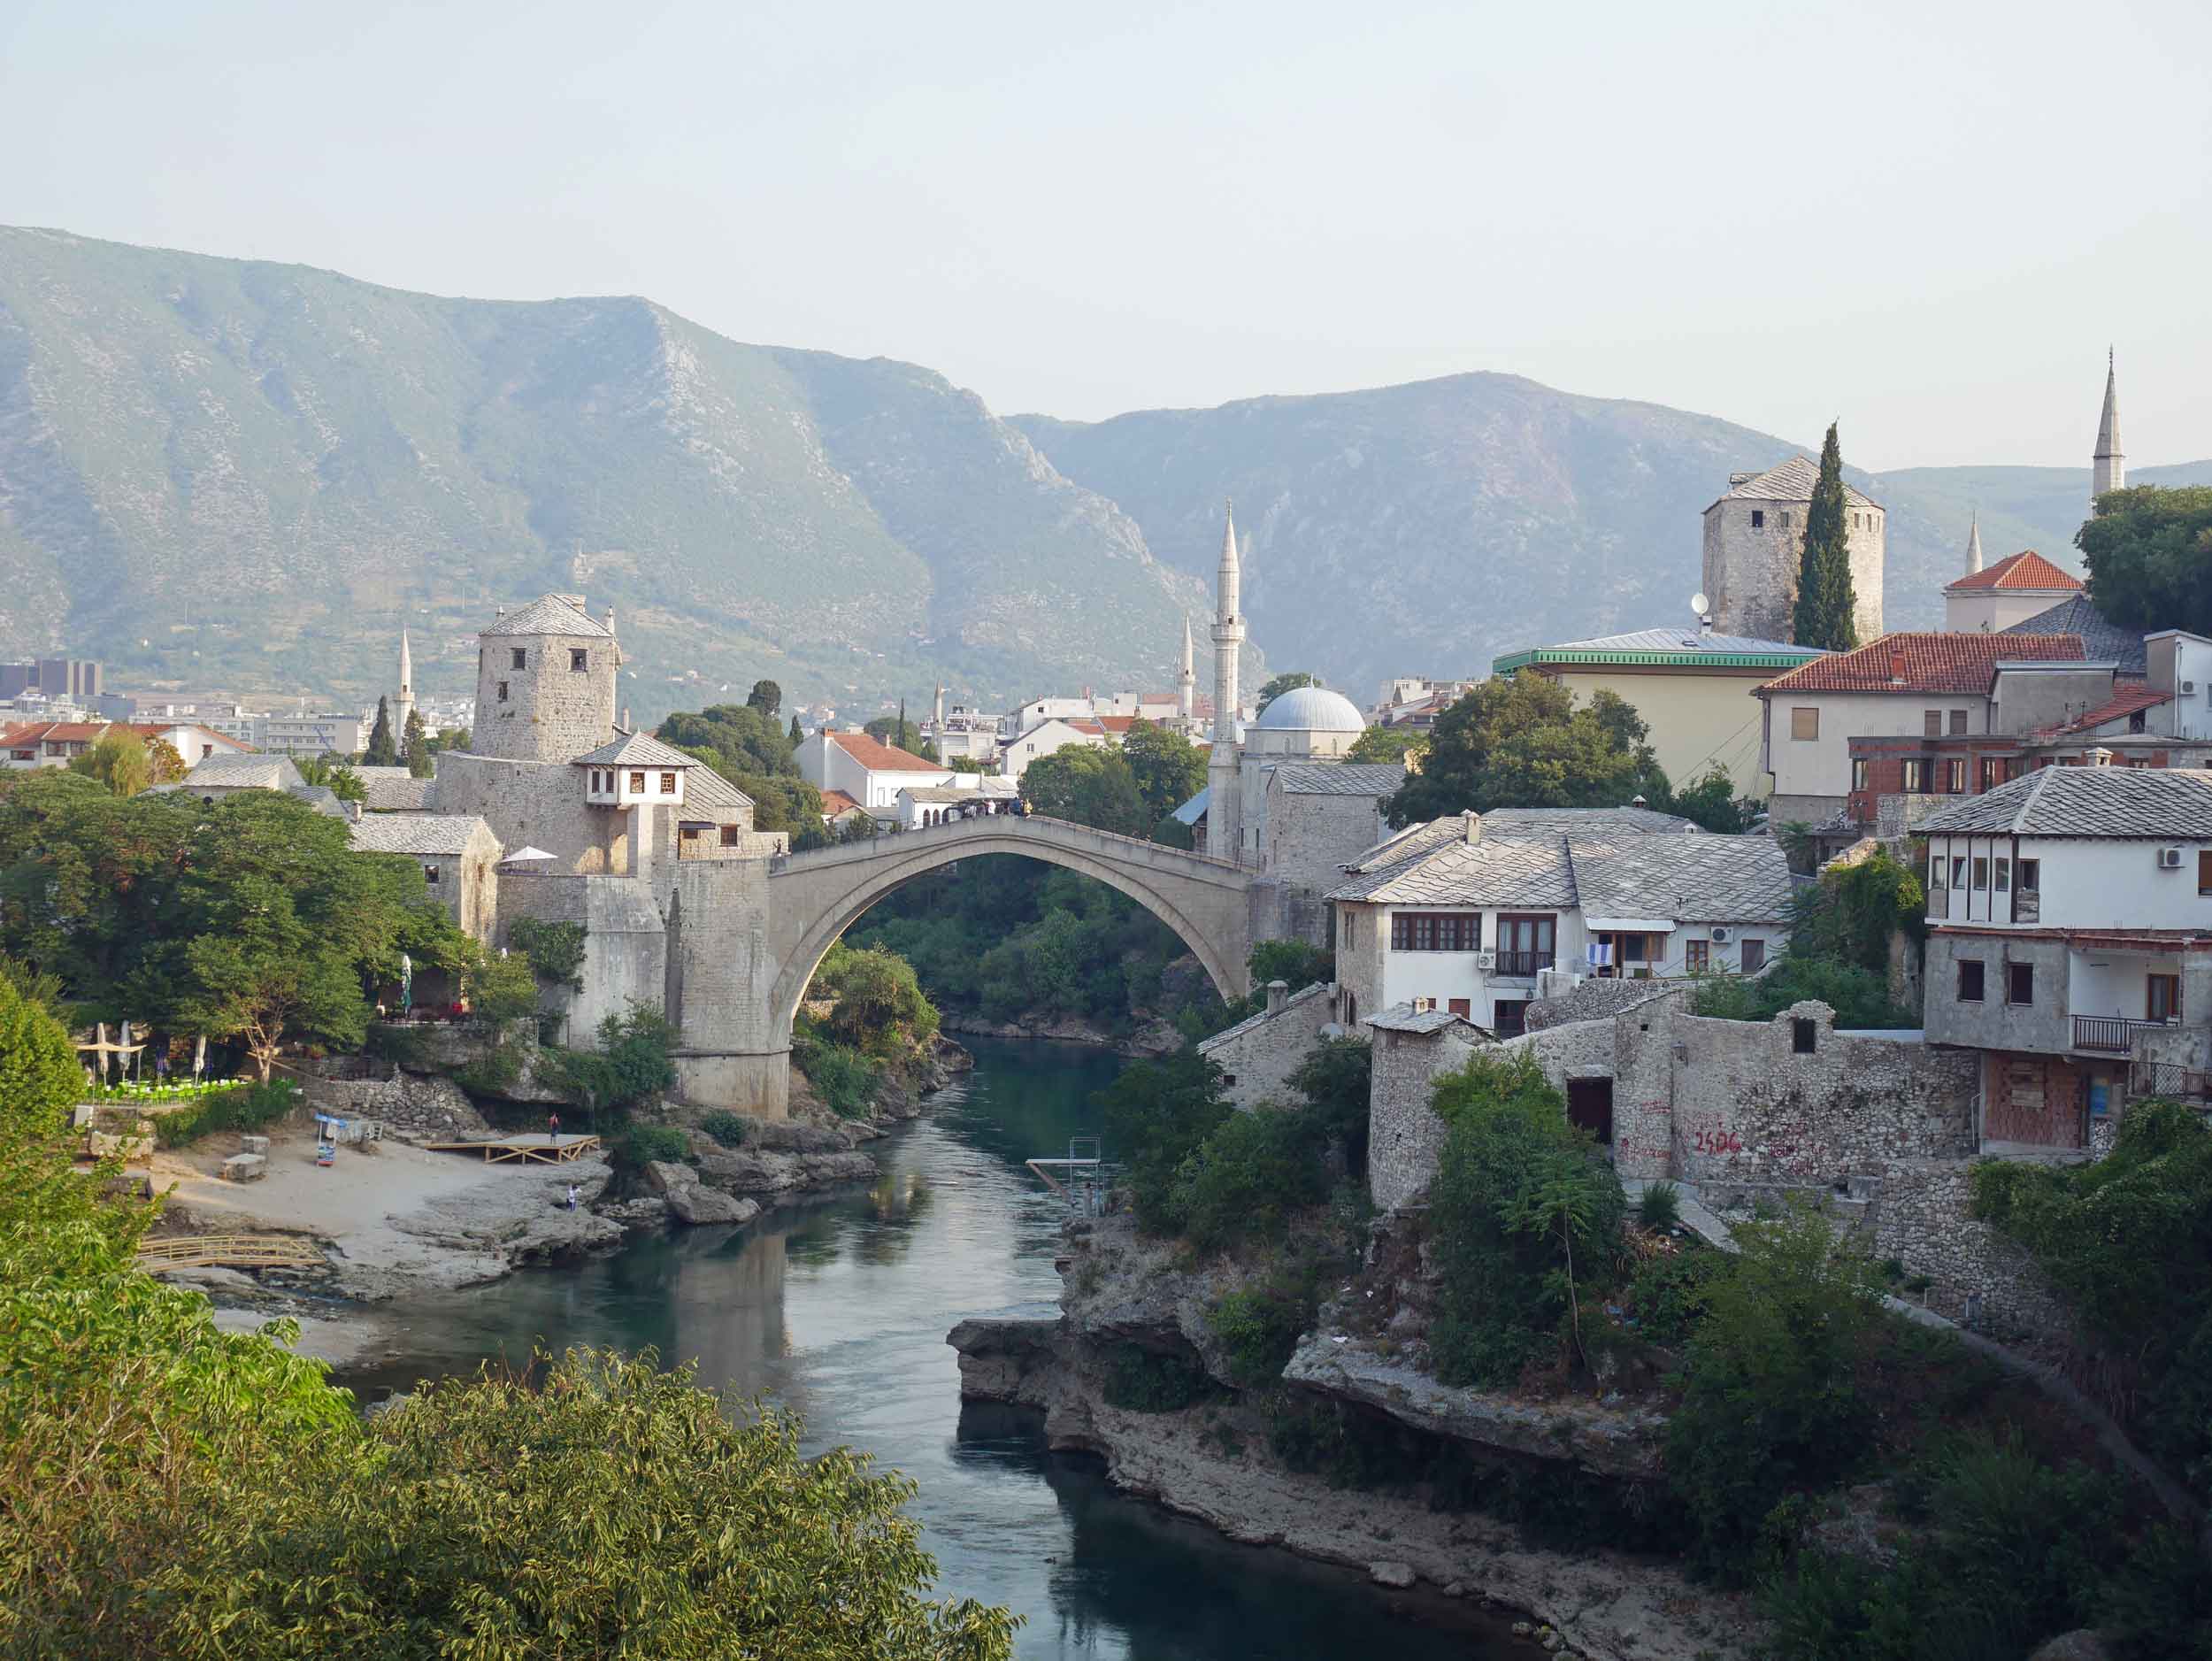  Charming Mostar was badly damaged during the Bosnian War, including the Stari Most which had to be rebuilt during reconstruction. 